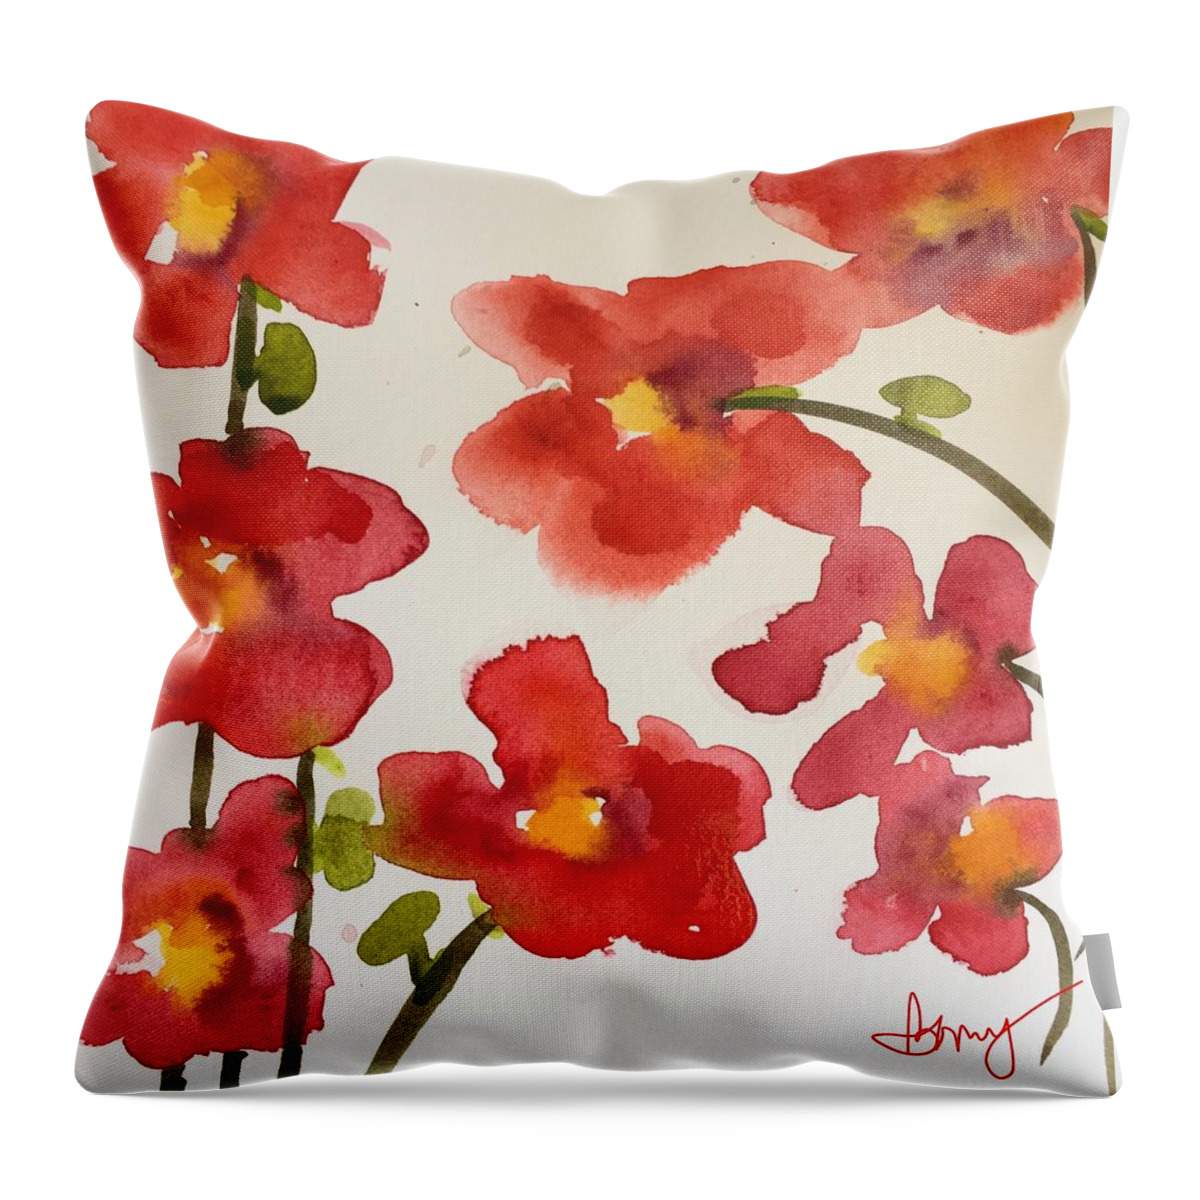 Watercolor Throw Pillow featuring the painting Poppy Festival by Bonny Butler